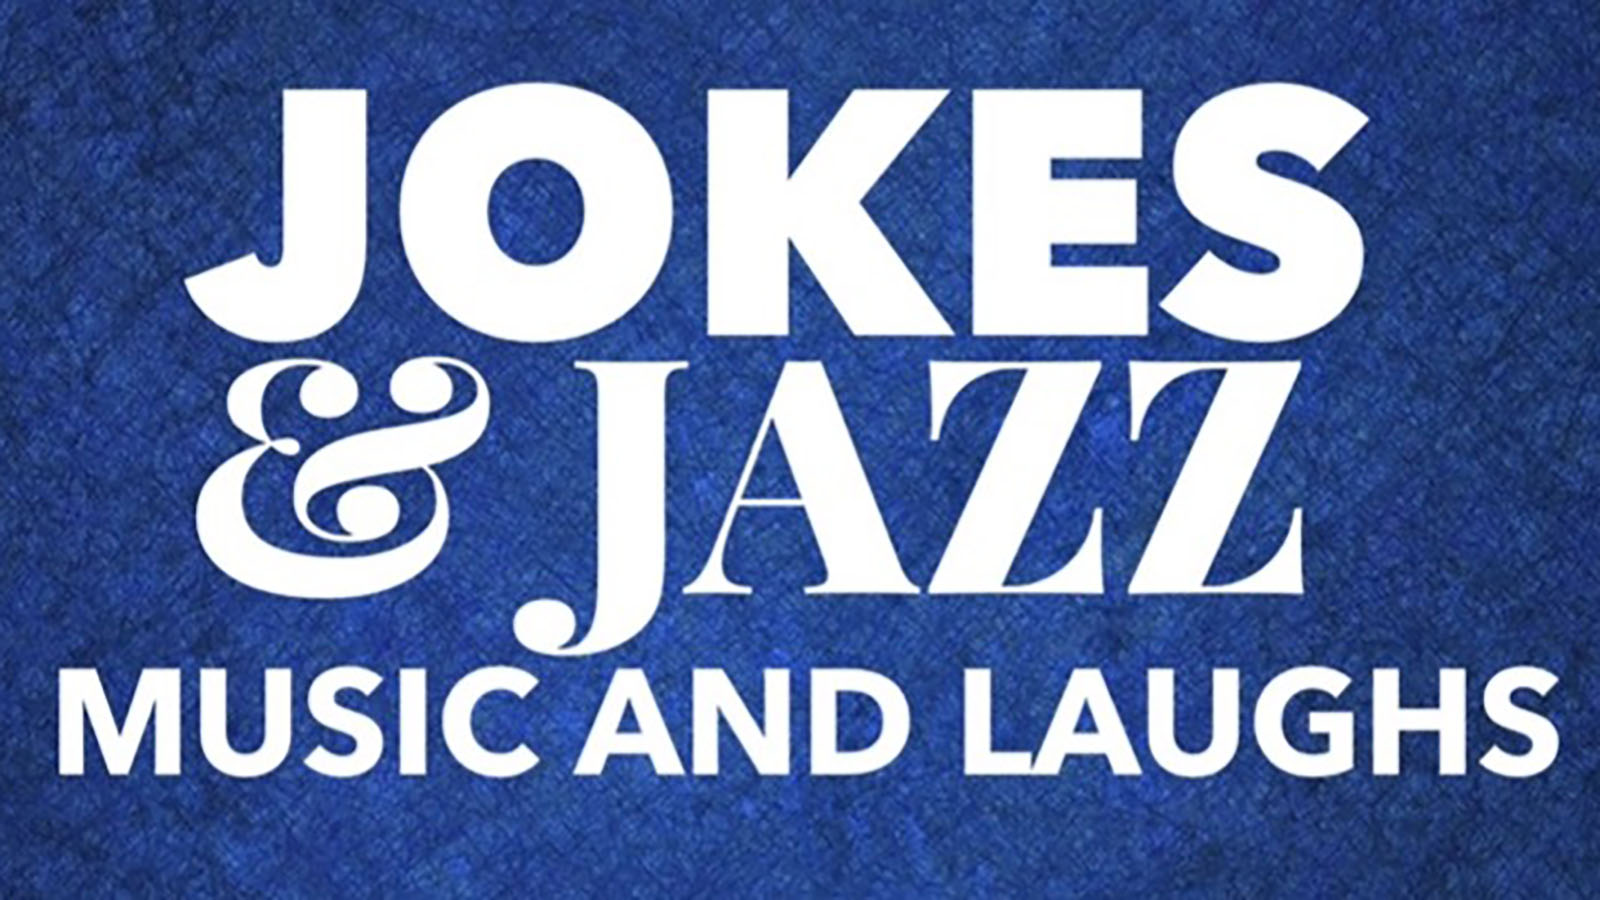 Jokes & Jazz: Curated by Wali Collins · Lincoln Center